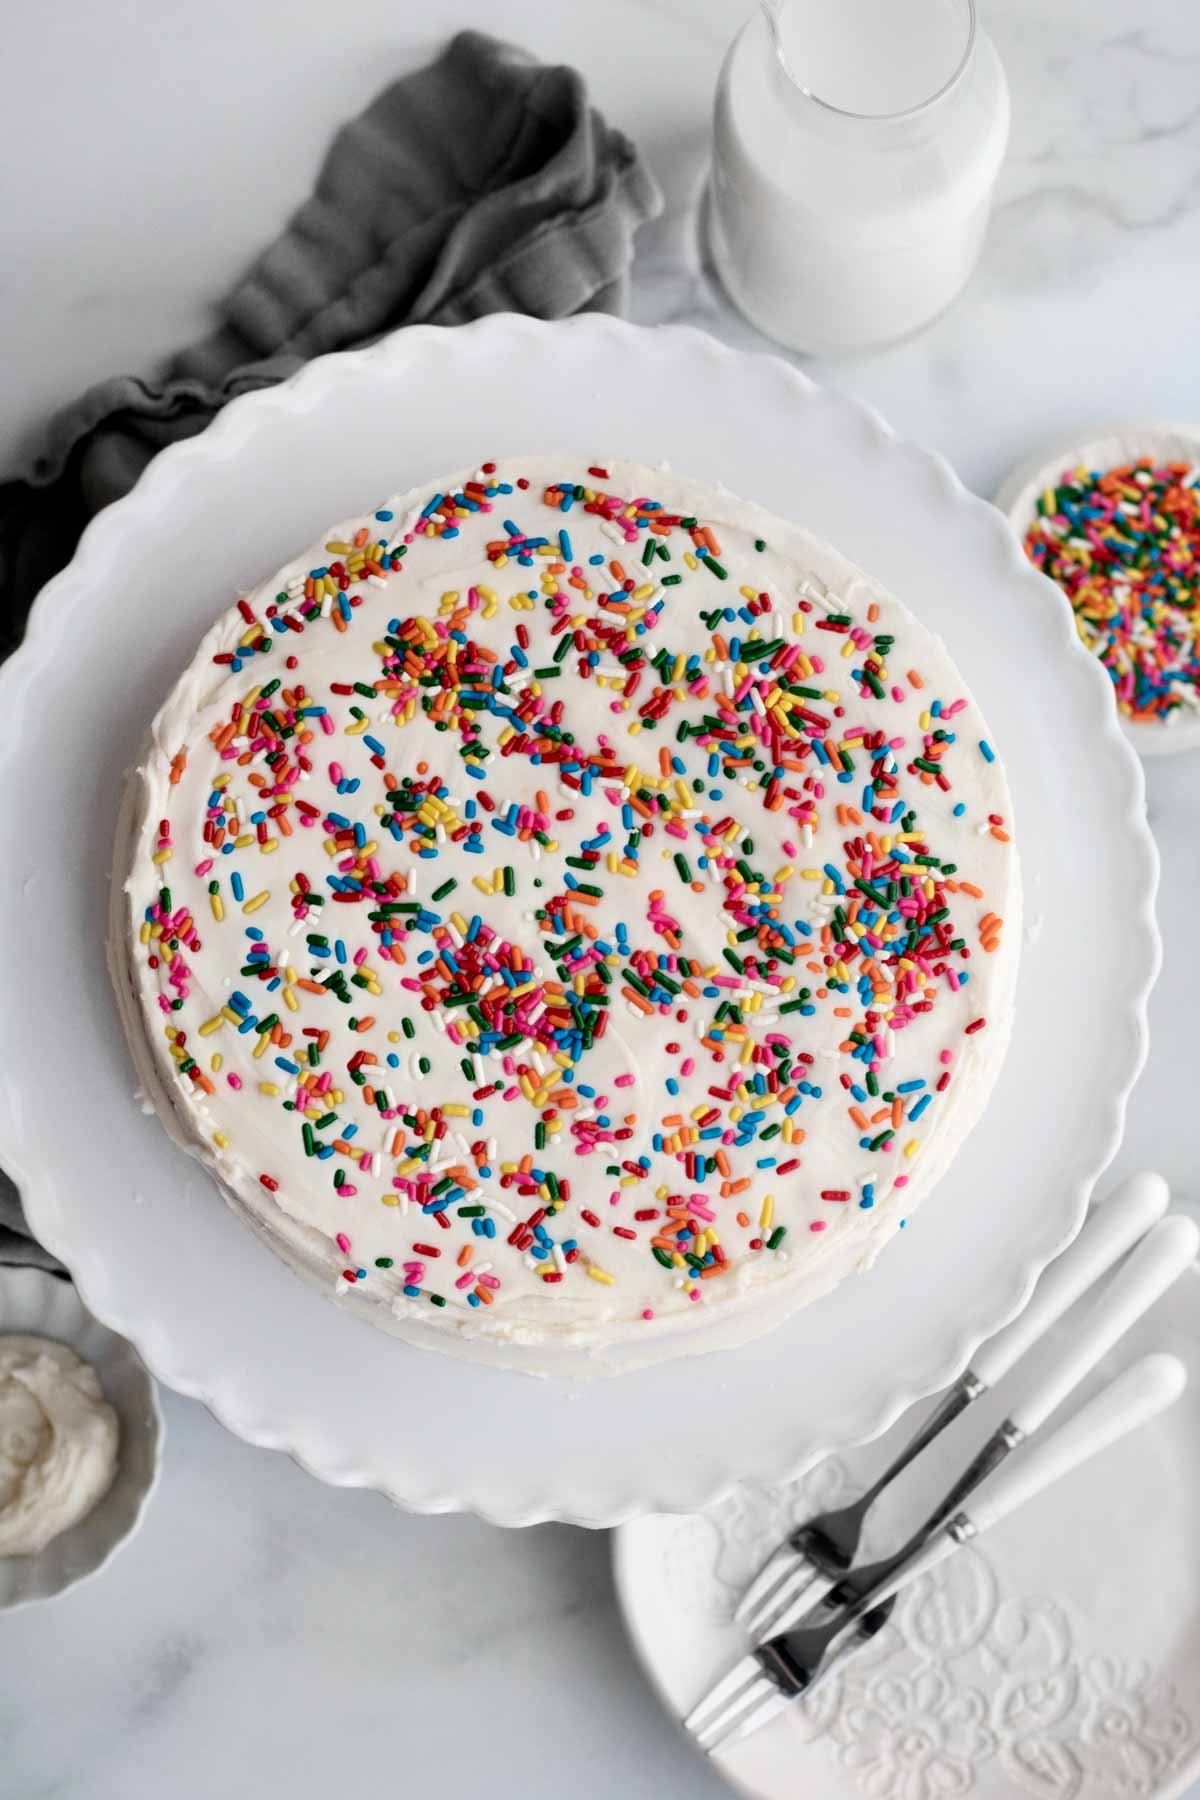 Looking down at the whole round white cake topped with sprinkles.